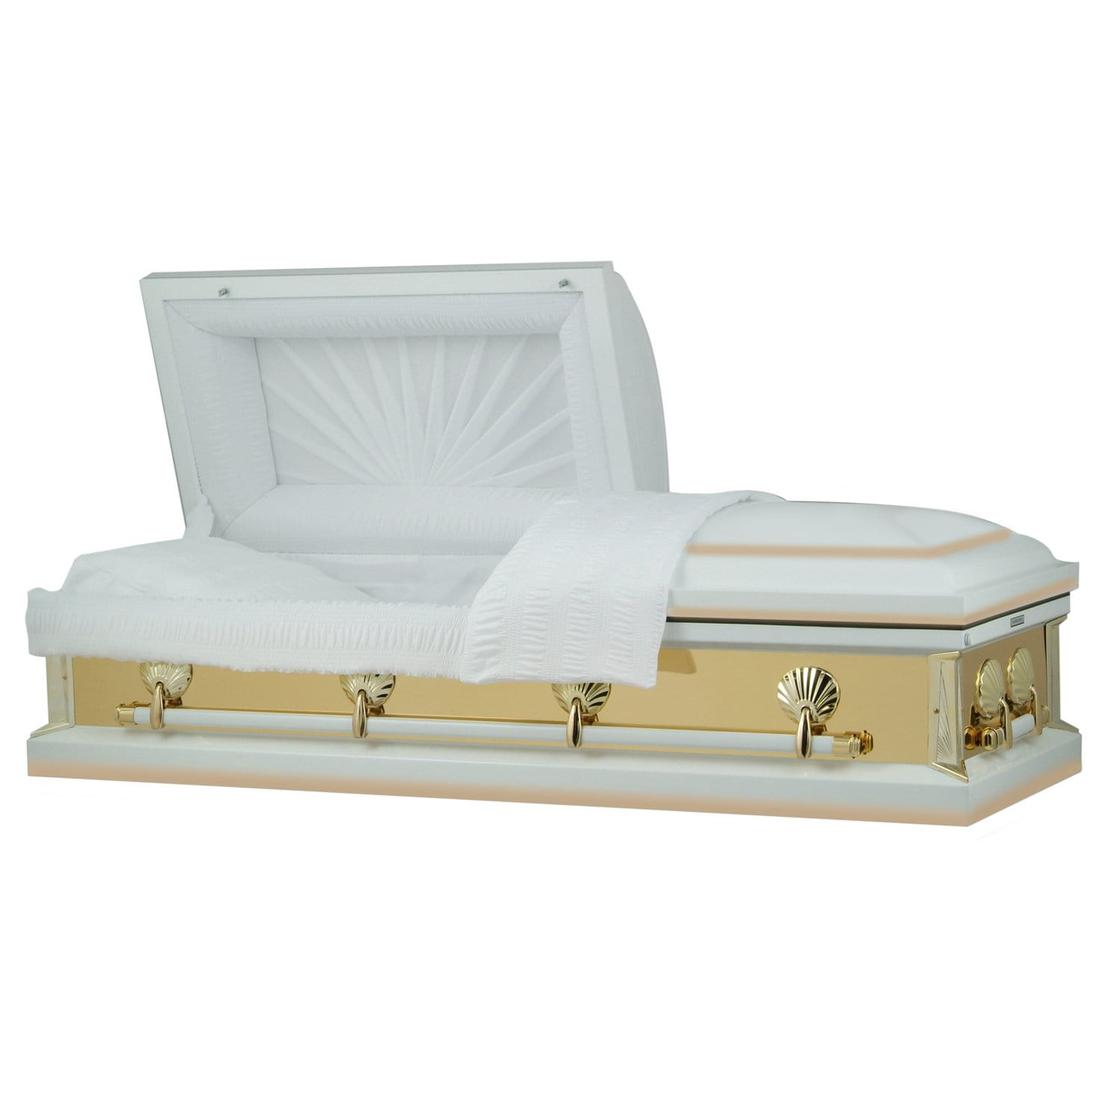 Photo of Titan Reflections Series | White and Gold Steel Casket with White Interior